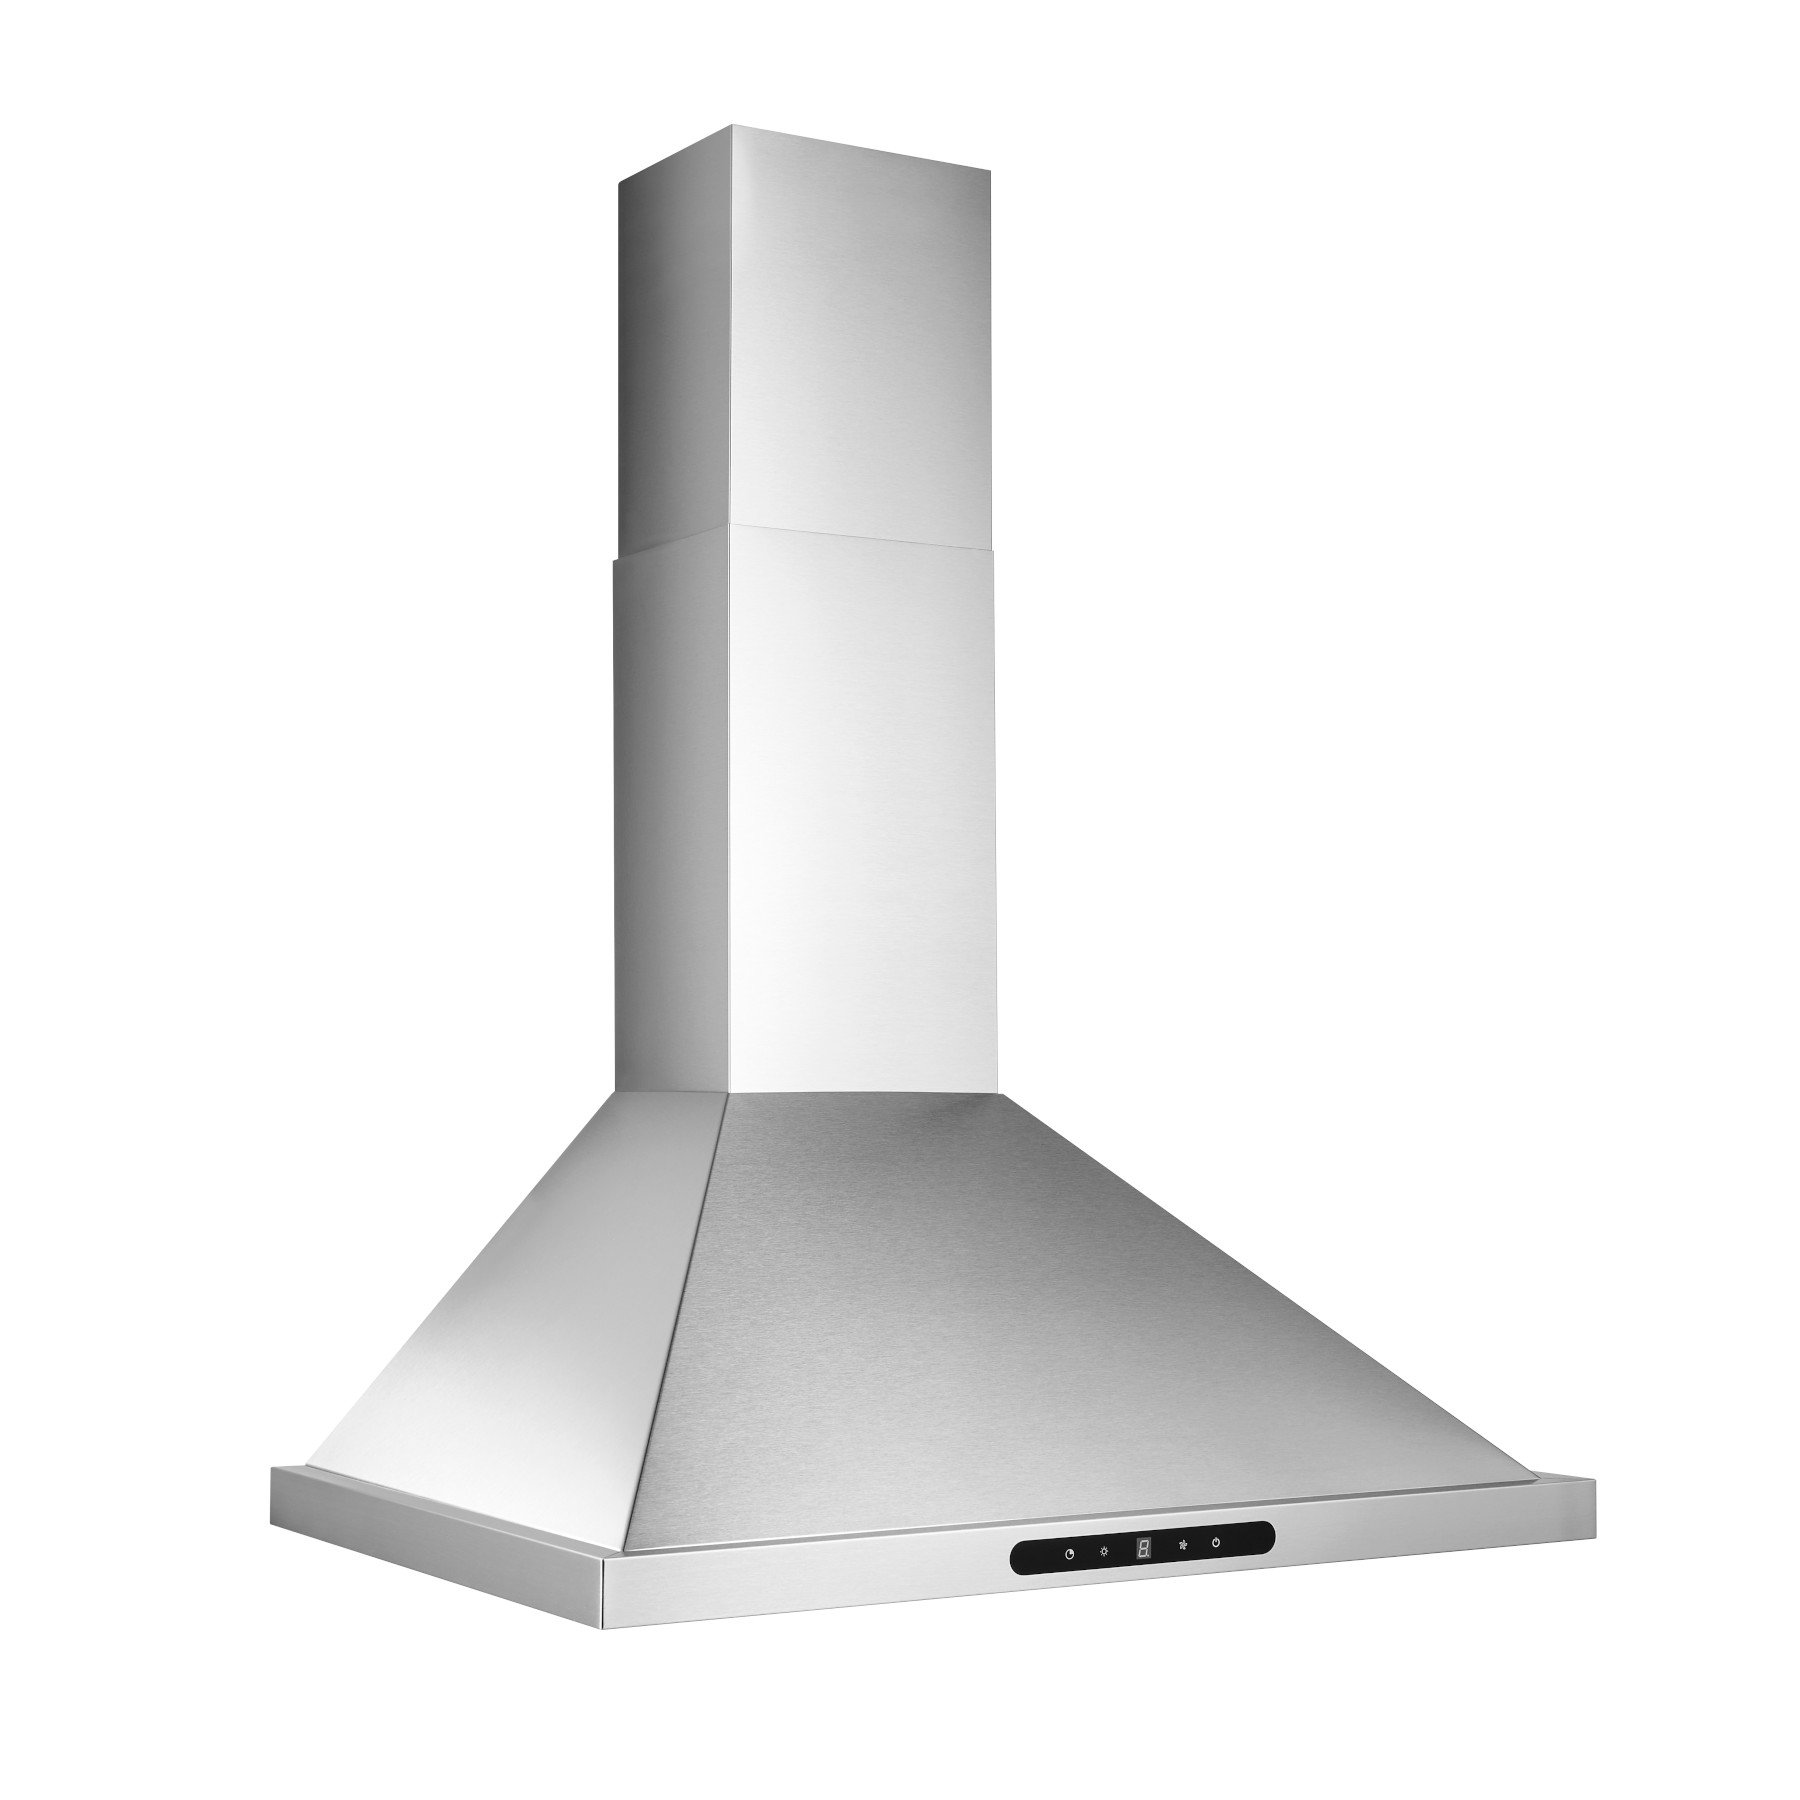 Vent-A-Hood PRH18-M30 30 Wall Mounted Range Hood with Single or Dual Blower Opt Stainless Steel